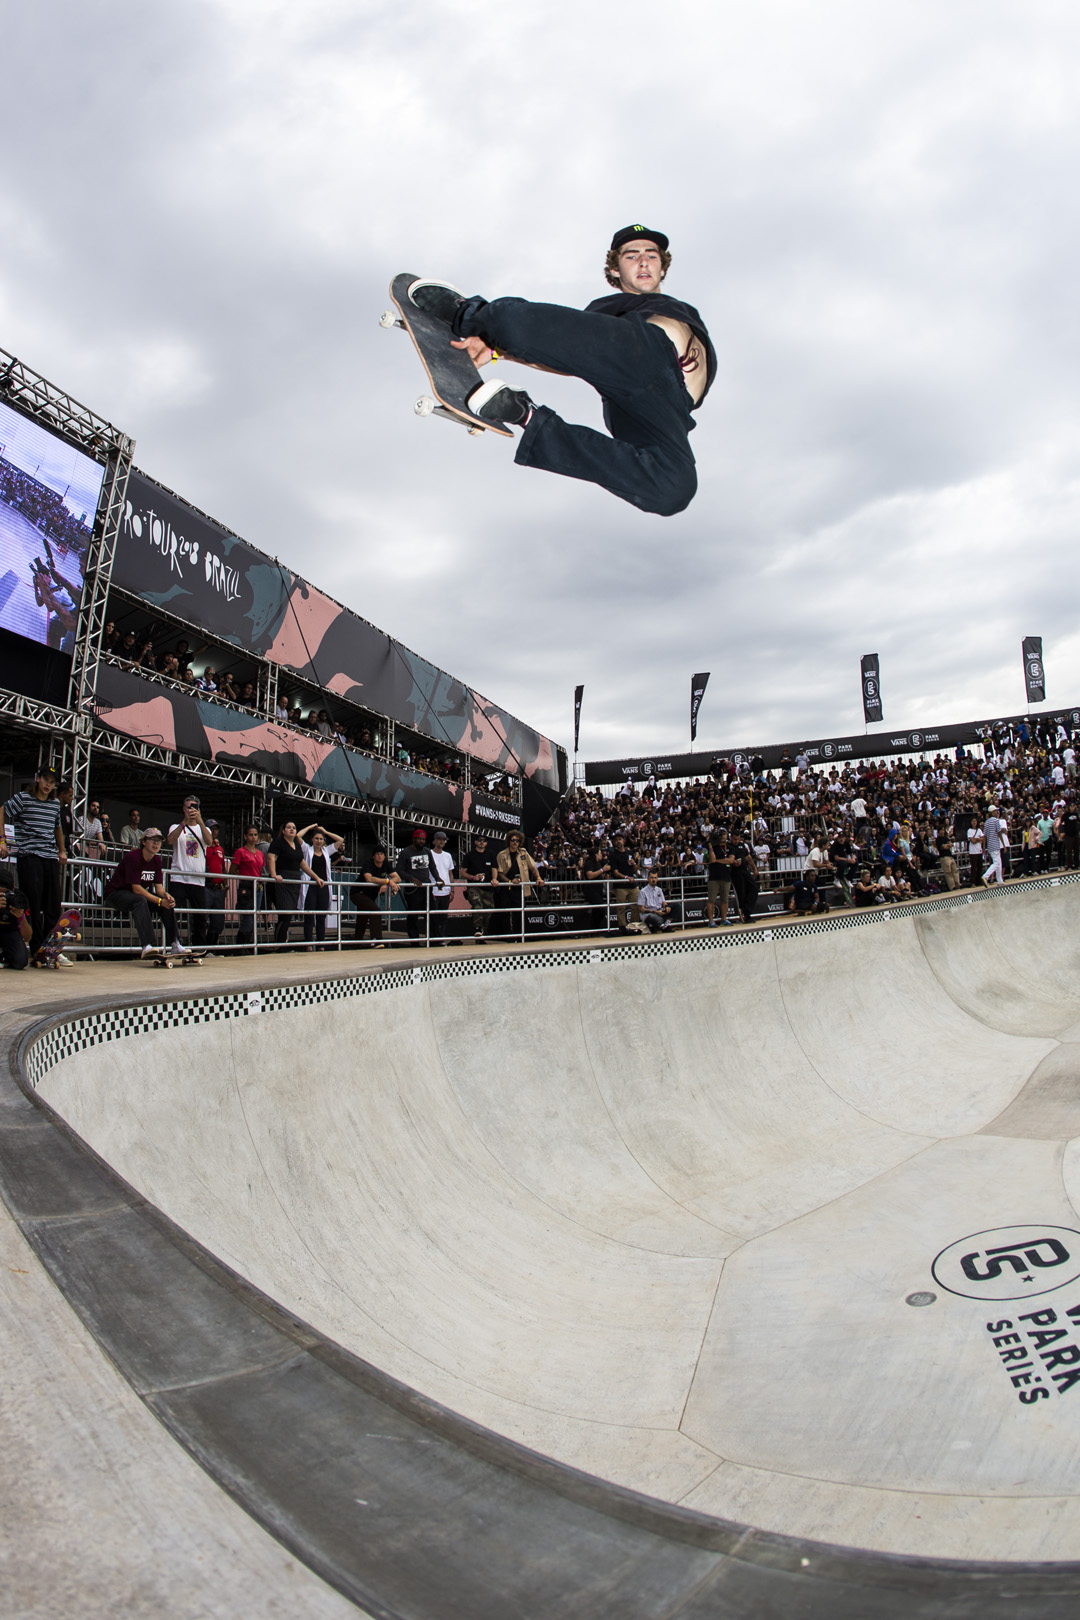 Monster Energy’s Tom Schaar Takes 1st Place at Vans Park Series Pro Tour Event in São Paulo, Brazil